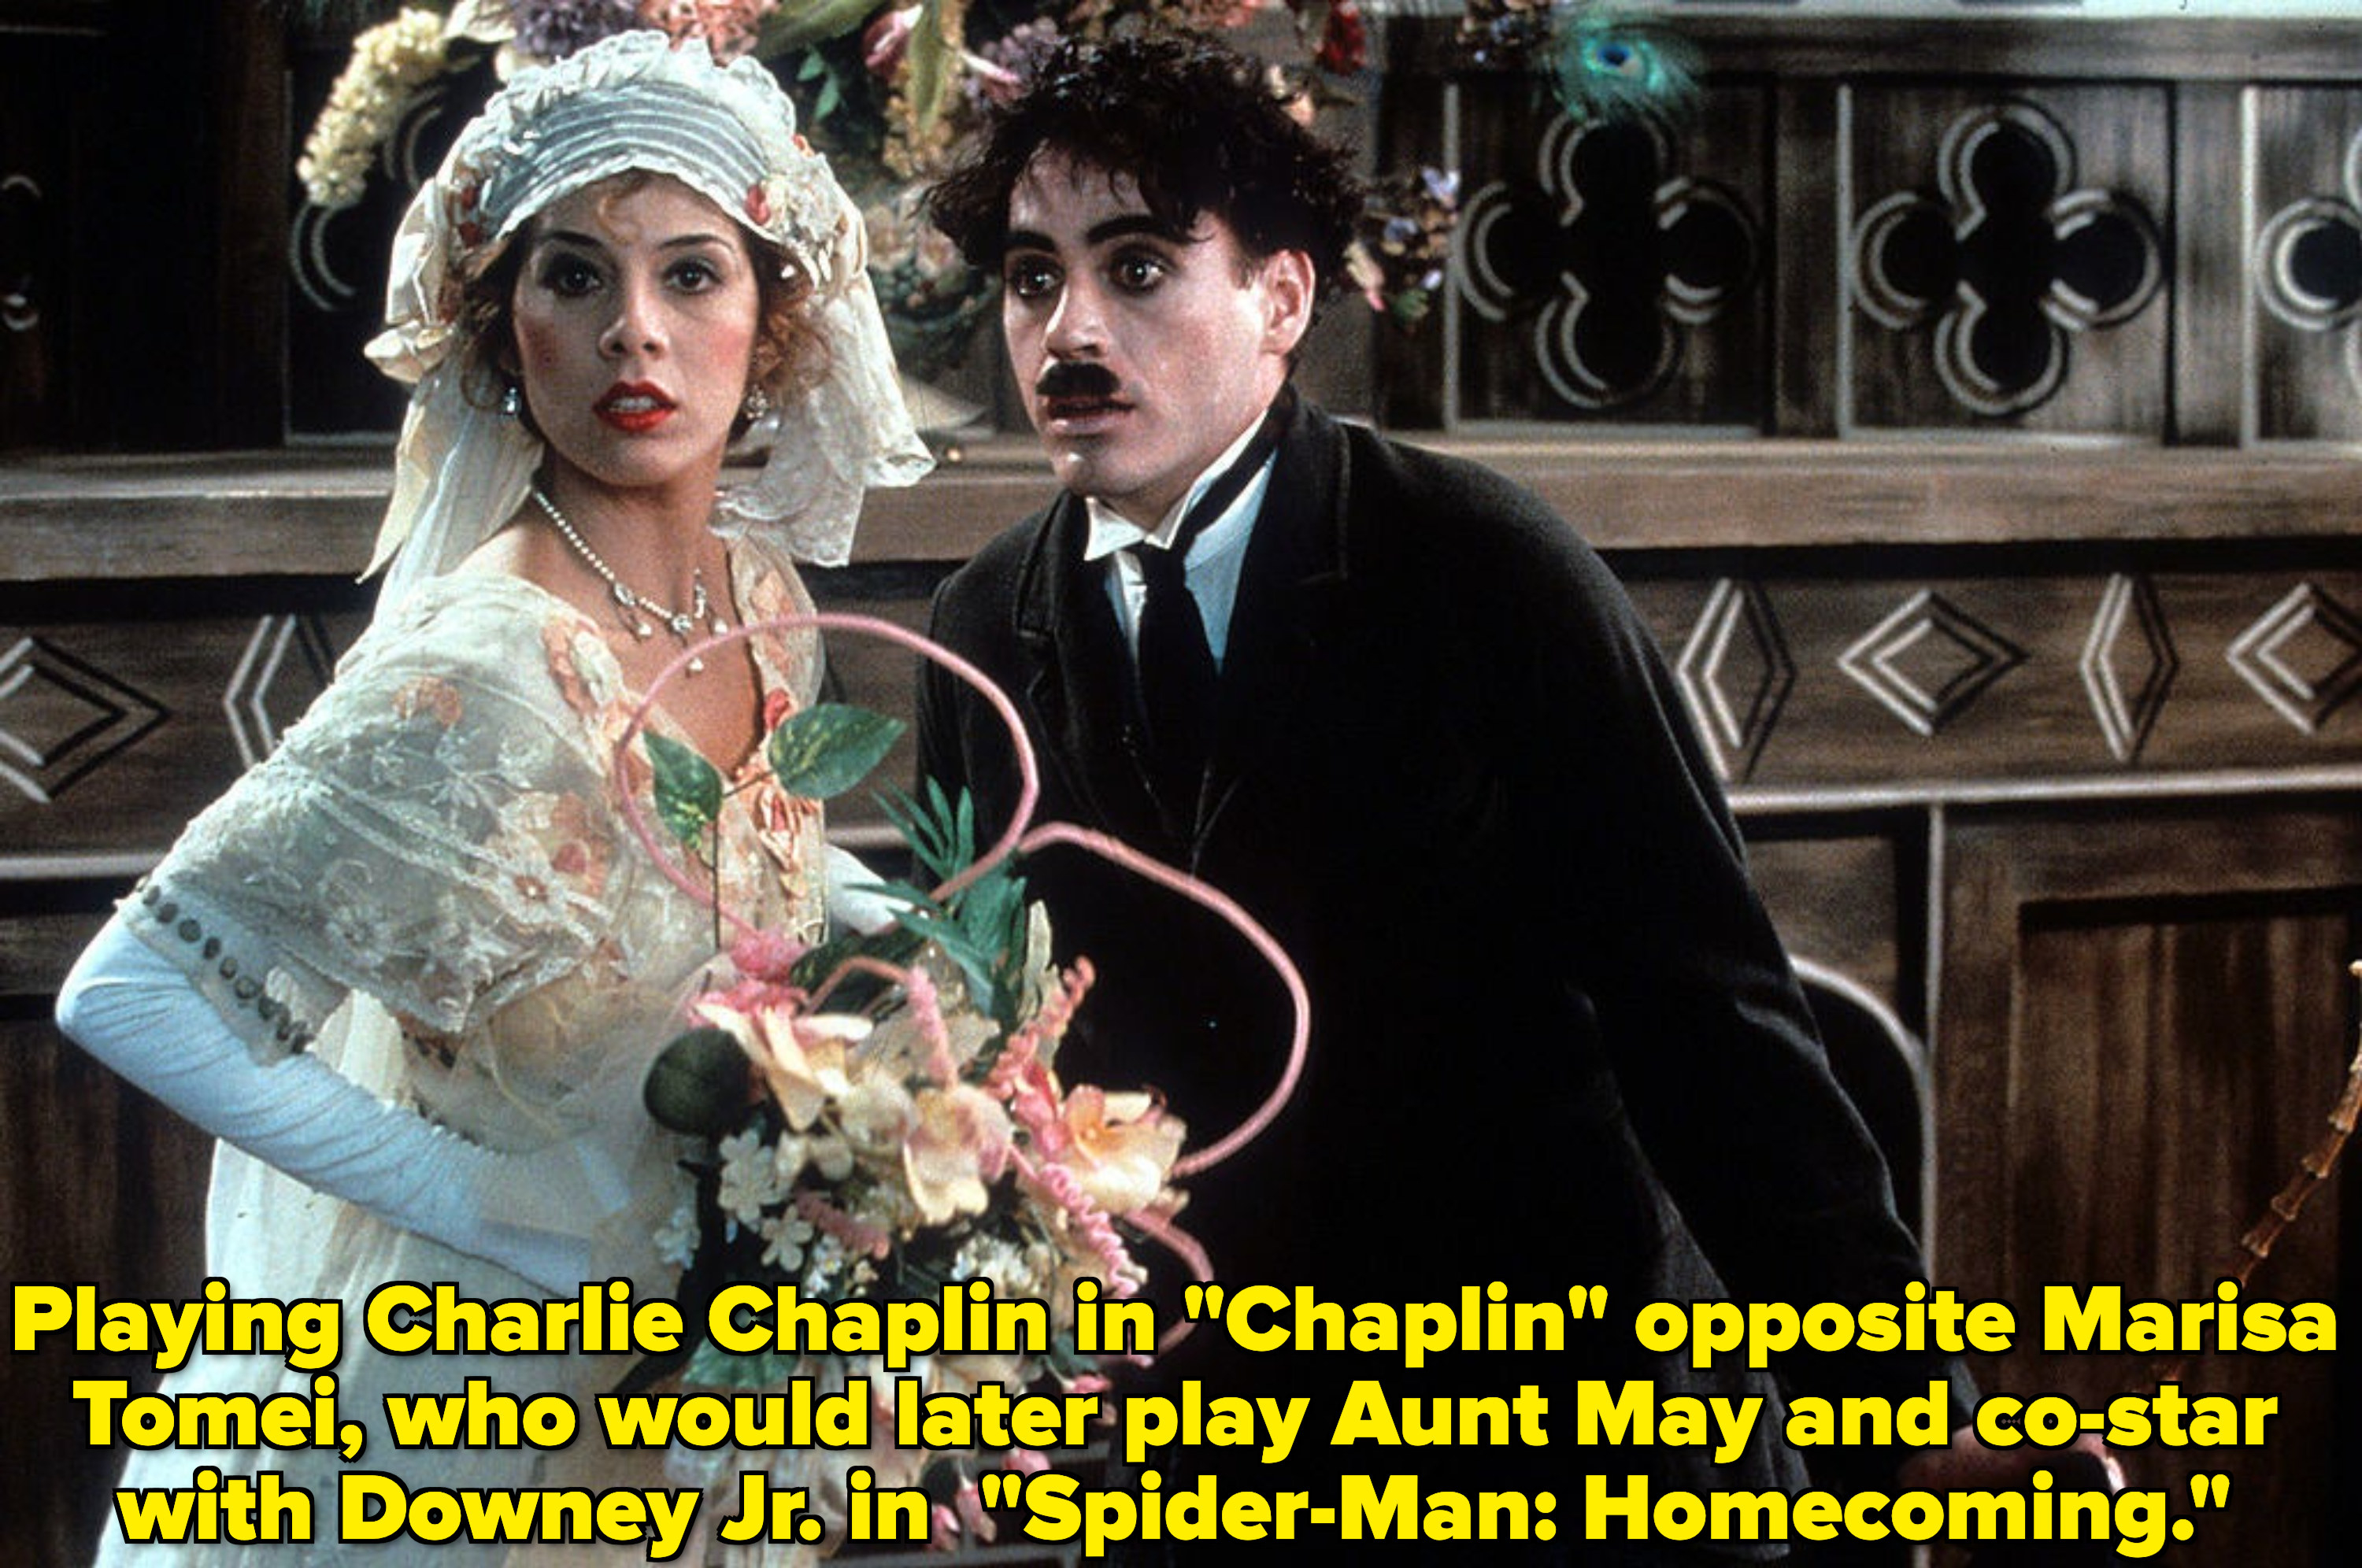 Marisa Tomei and Robert Downey Jr looking stunned in &quot;Chaplin&quot;